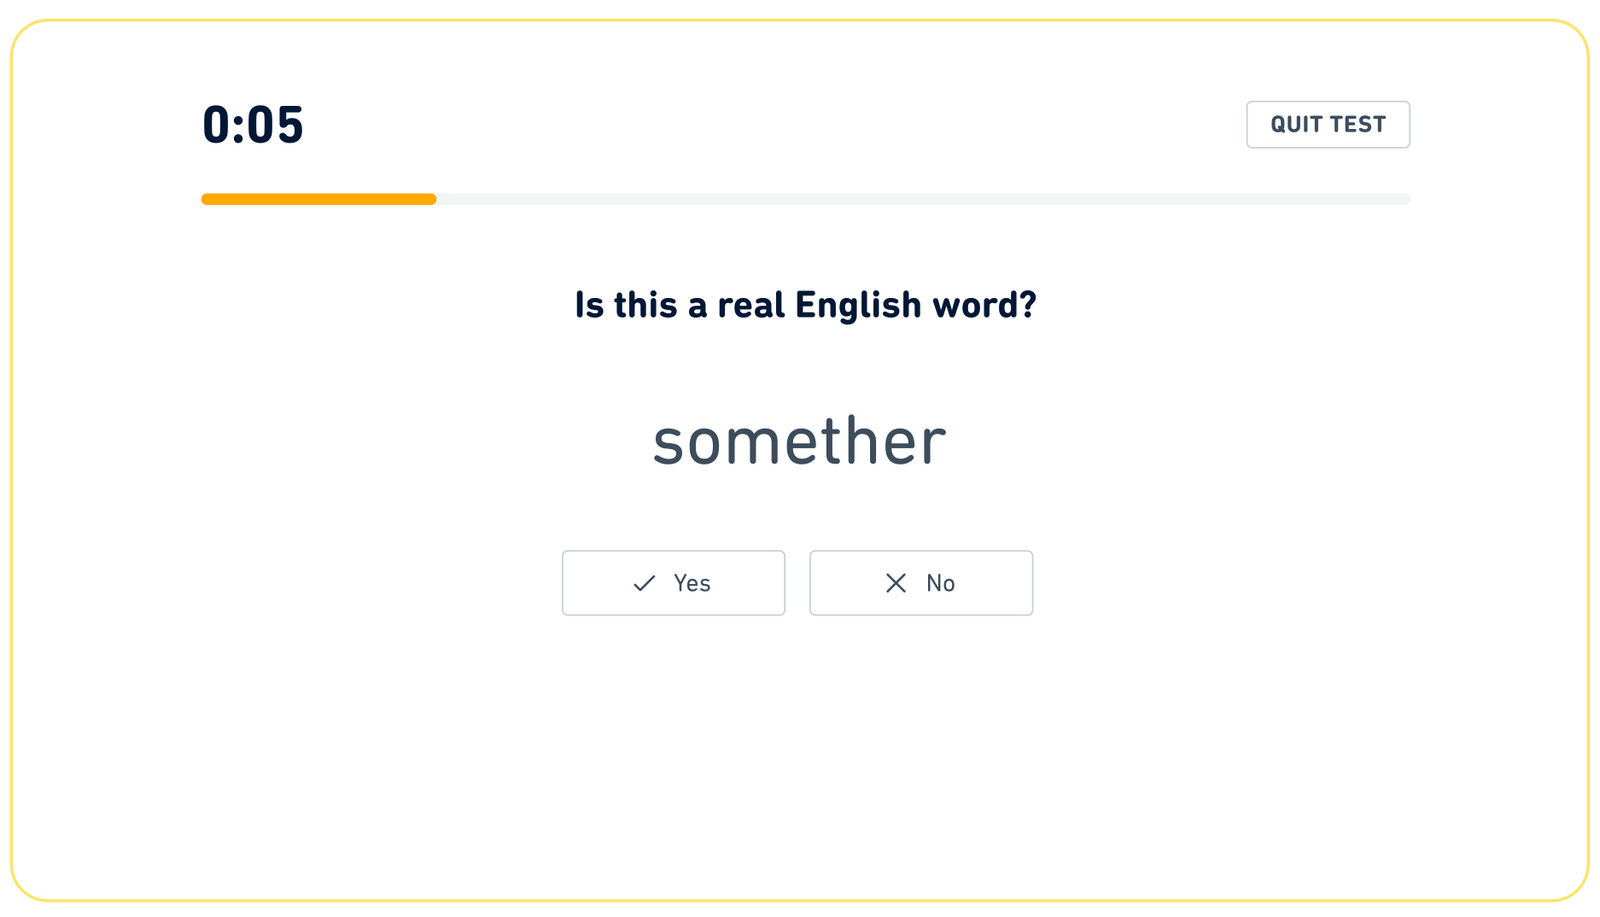 Screenshot showing the word "somether" which is not a real word